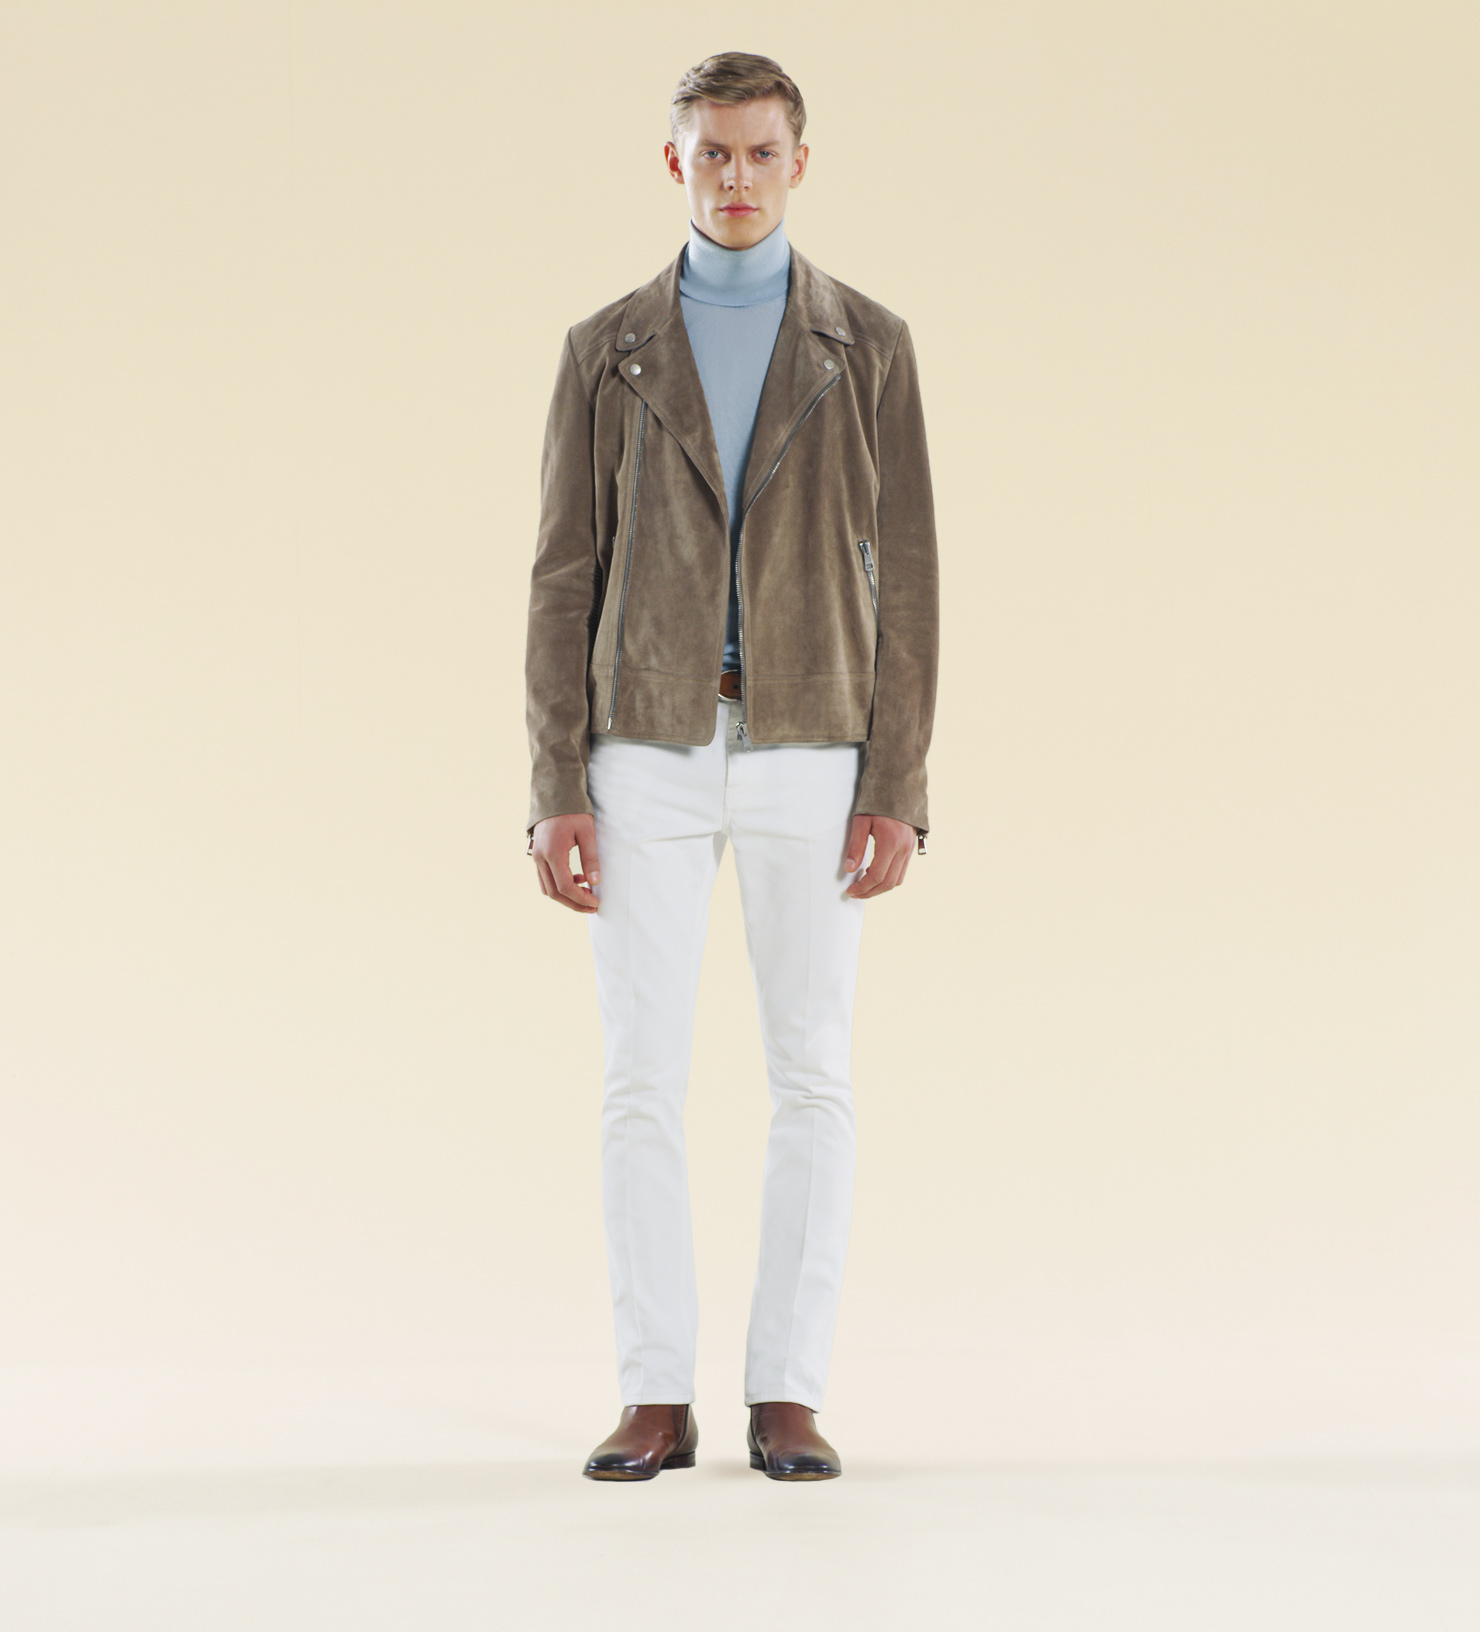 Gucci spring look book for men 2013